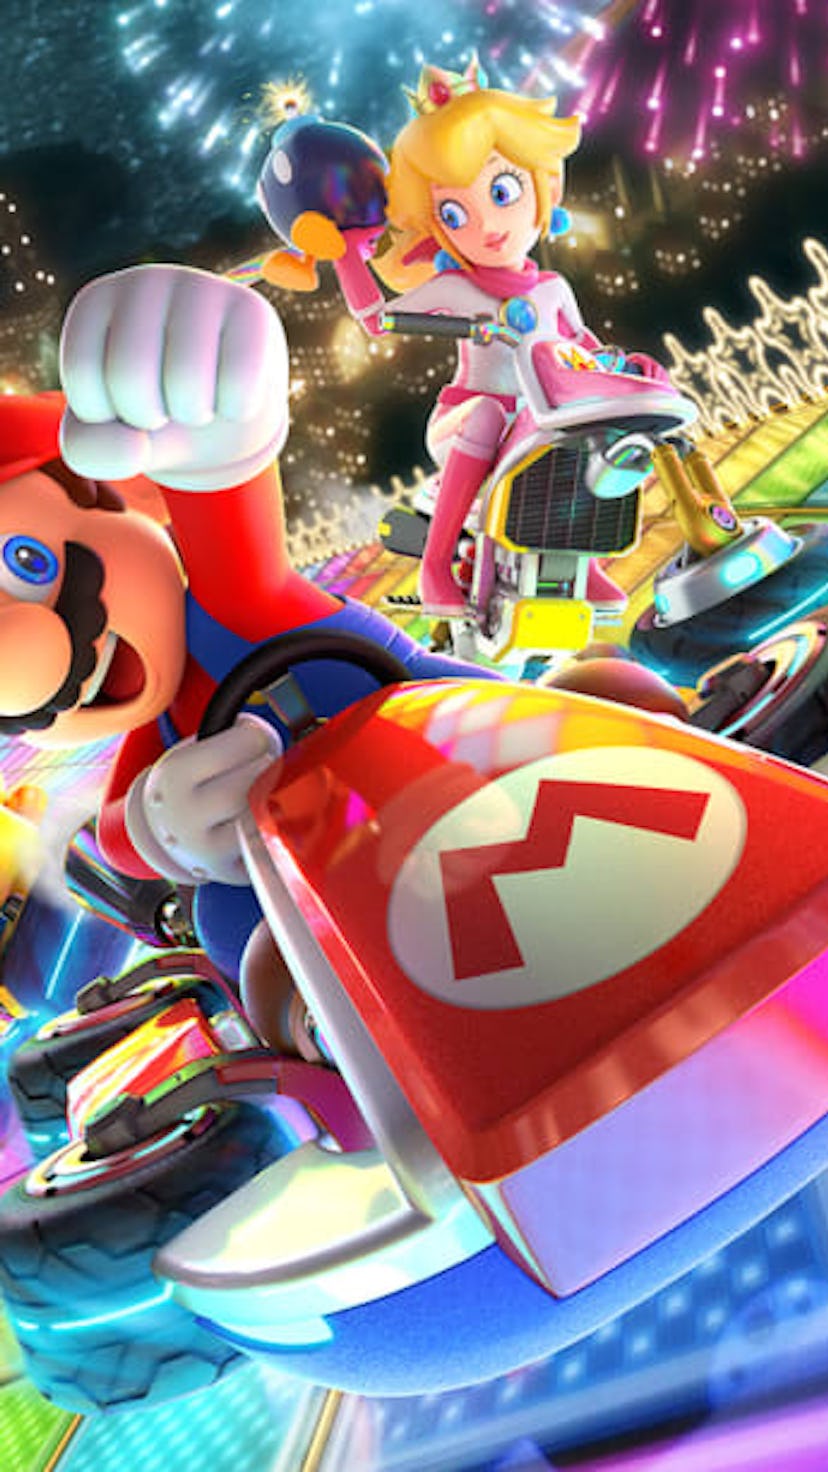 Mario Kart 8 for the Nintendo Switch. Gaming. Games. Video games.